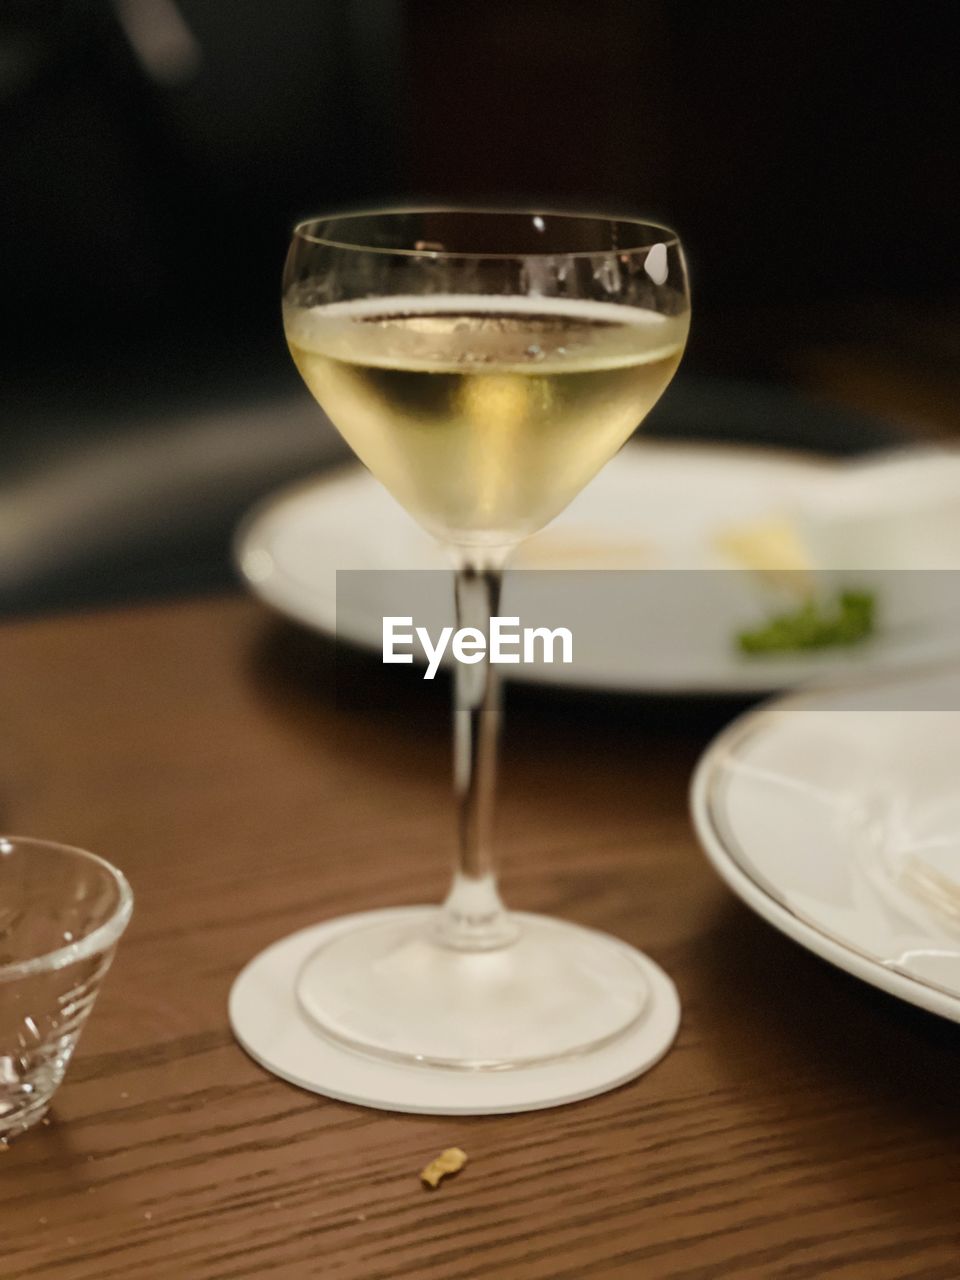 food and drink, glass, alcohol, drink, refreshment, food, table, drinking glass, household equipment, wine glass, no people, tableware, indoors, alcoholic beverage, wine, freshness, focus on foreground, plate, close-up, wood, still life, cocktail, martini glass